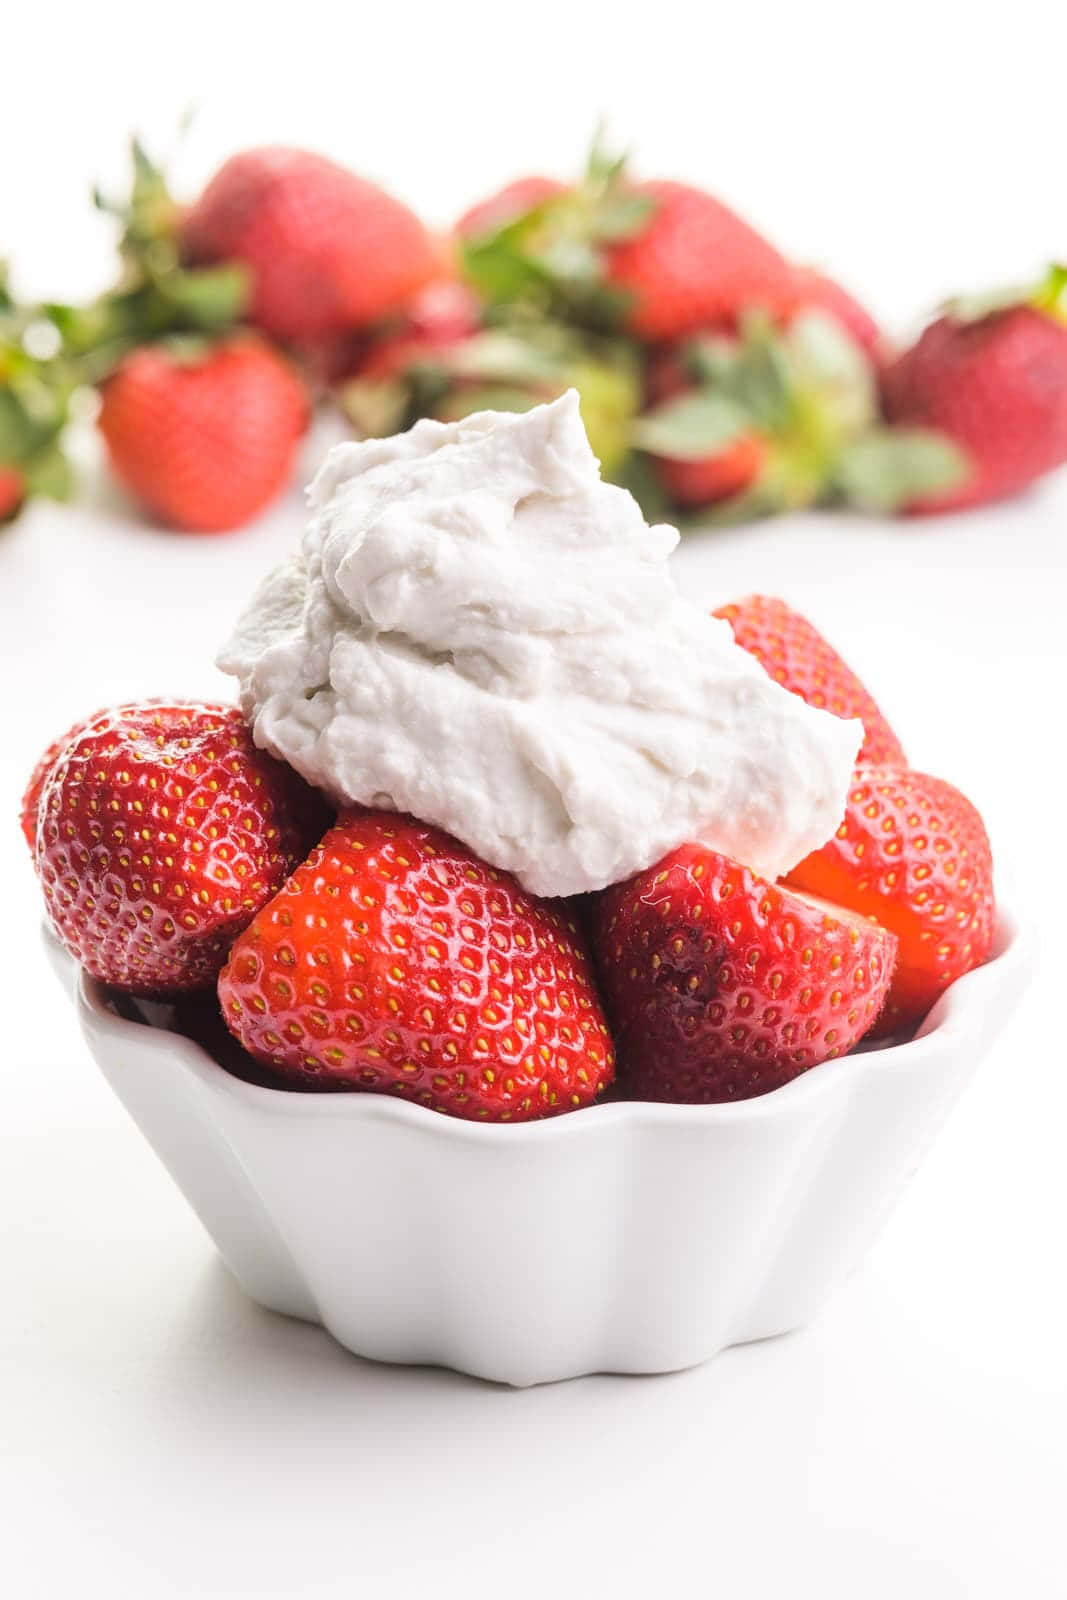 Bowl Of Whipped Cream Strawberries Background